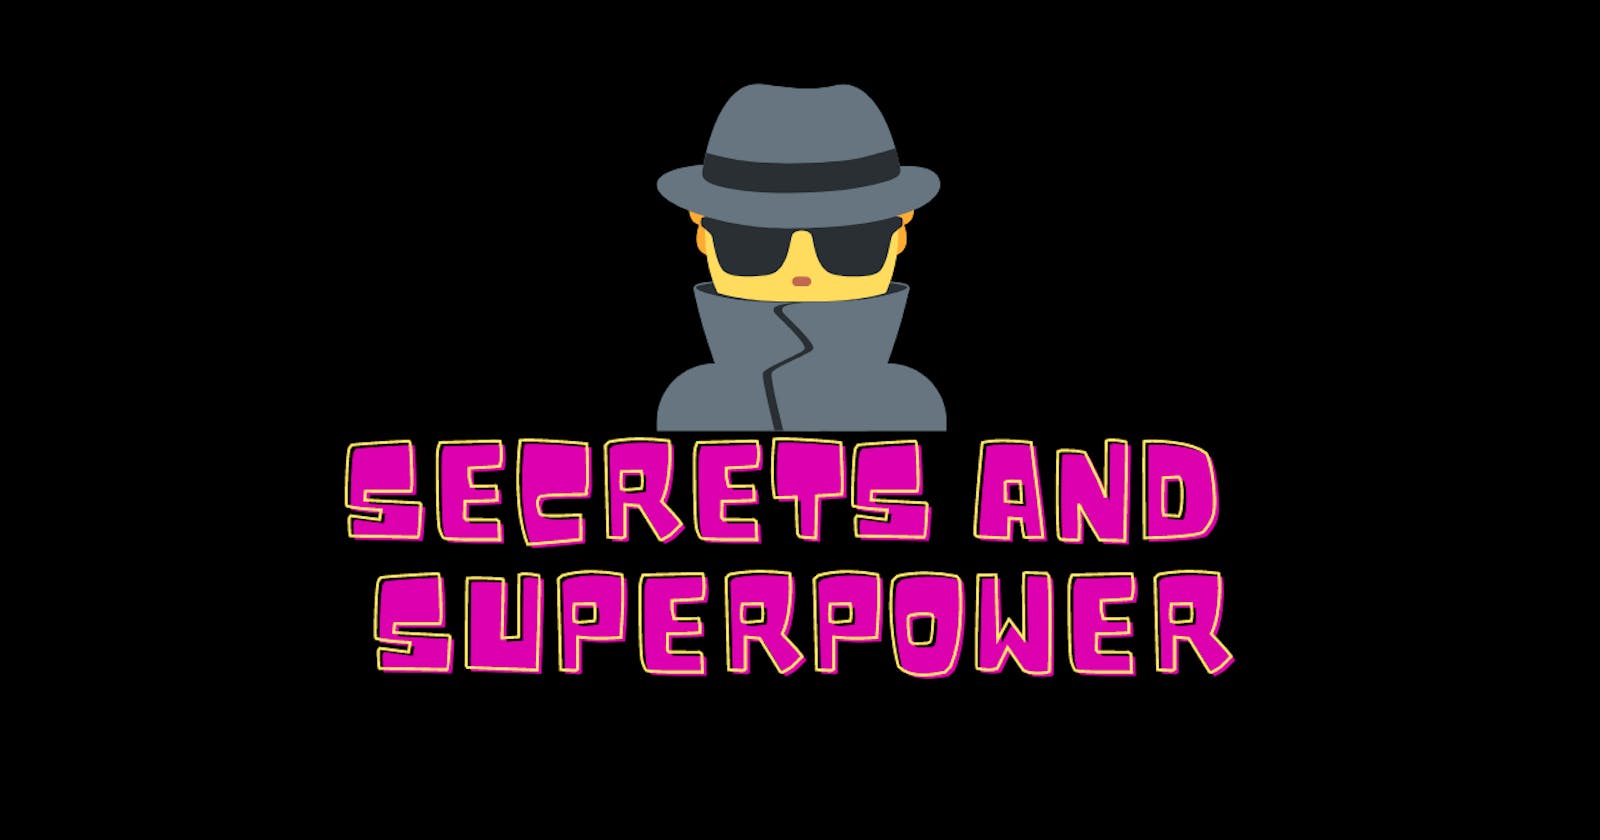 Title: "JavaScript Spies: Secrets and Superpowers"